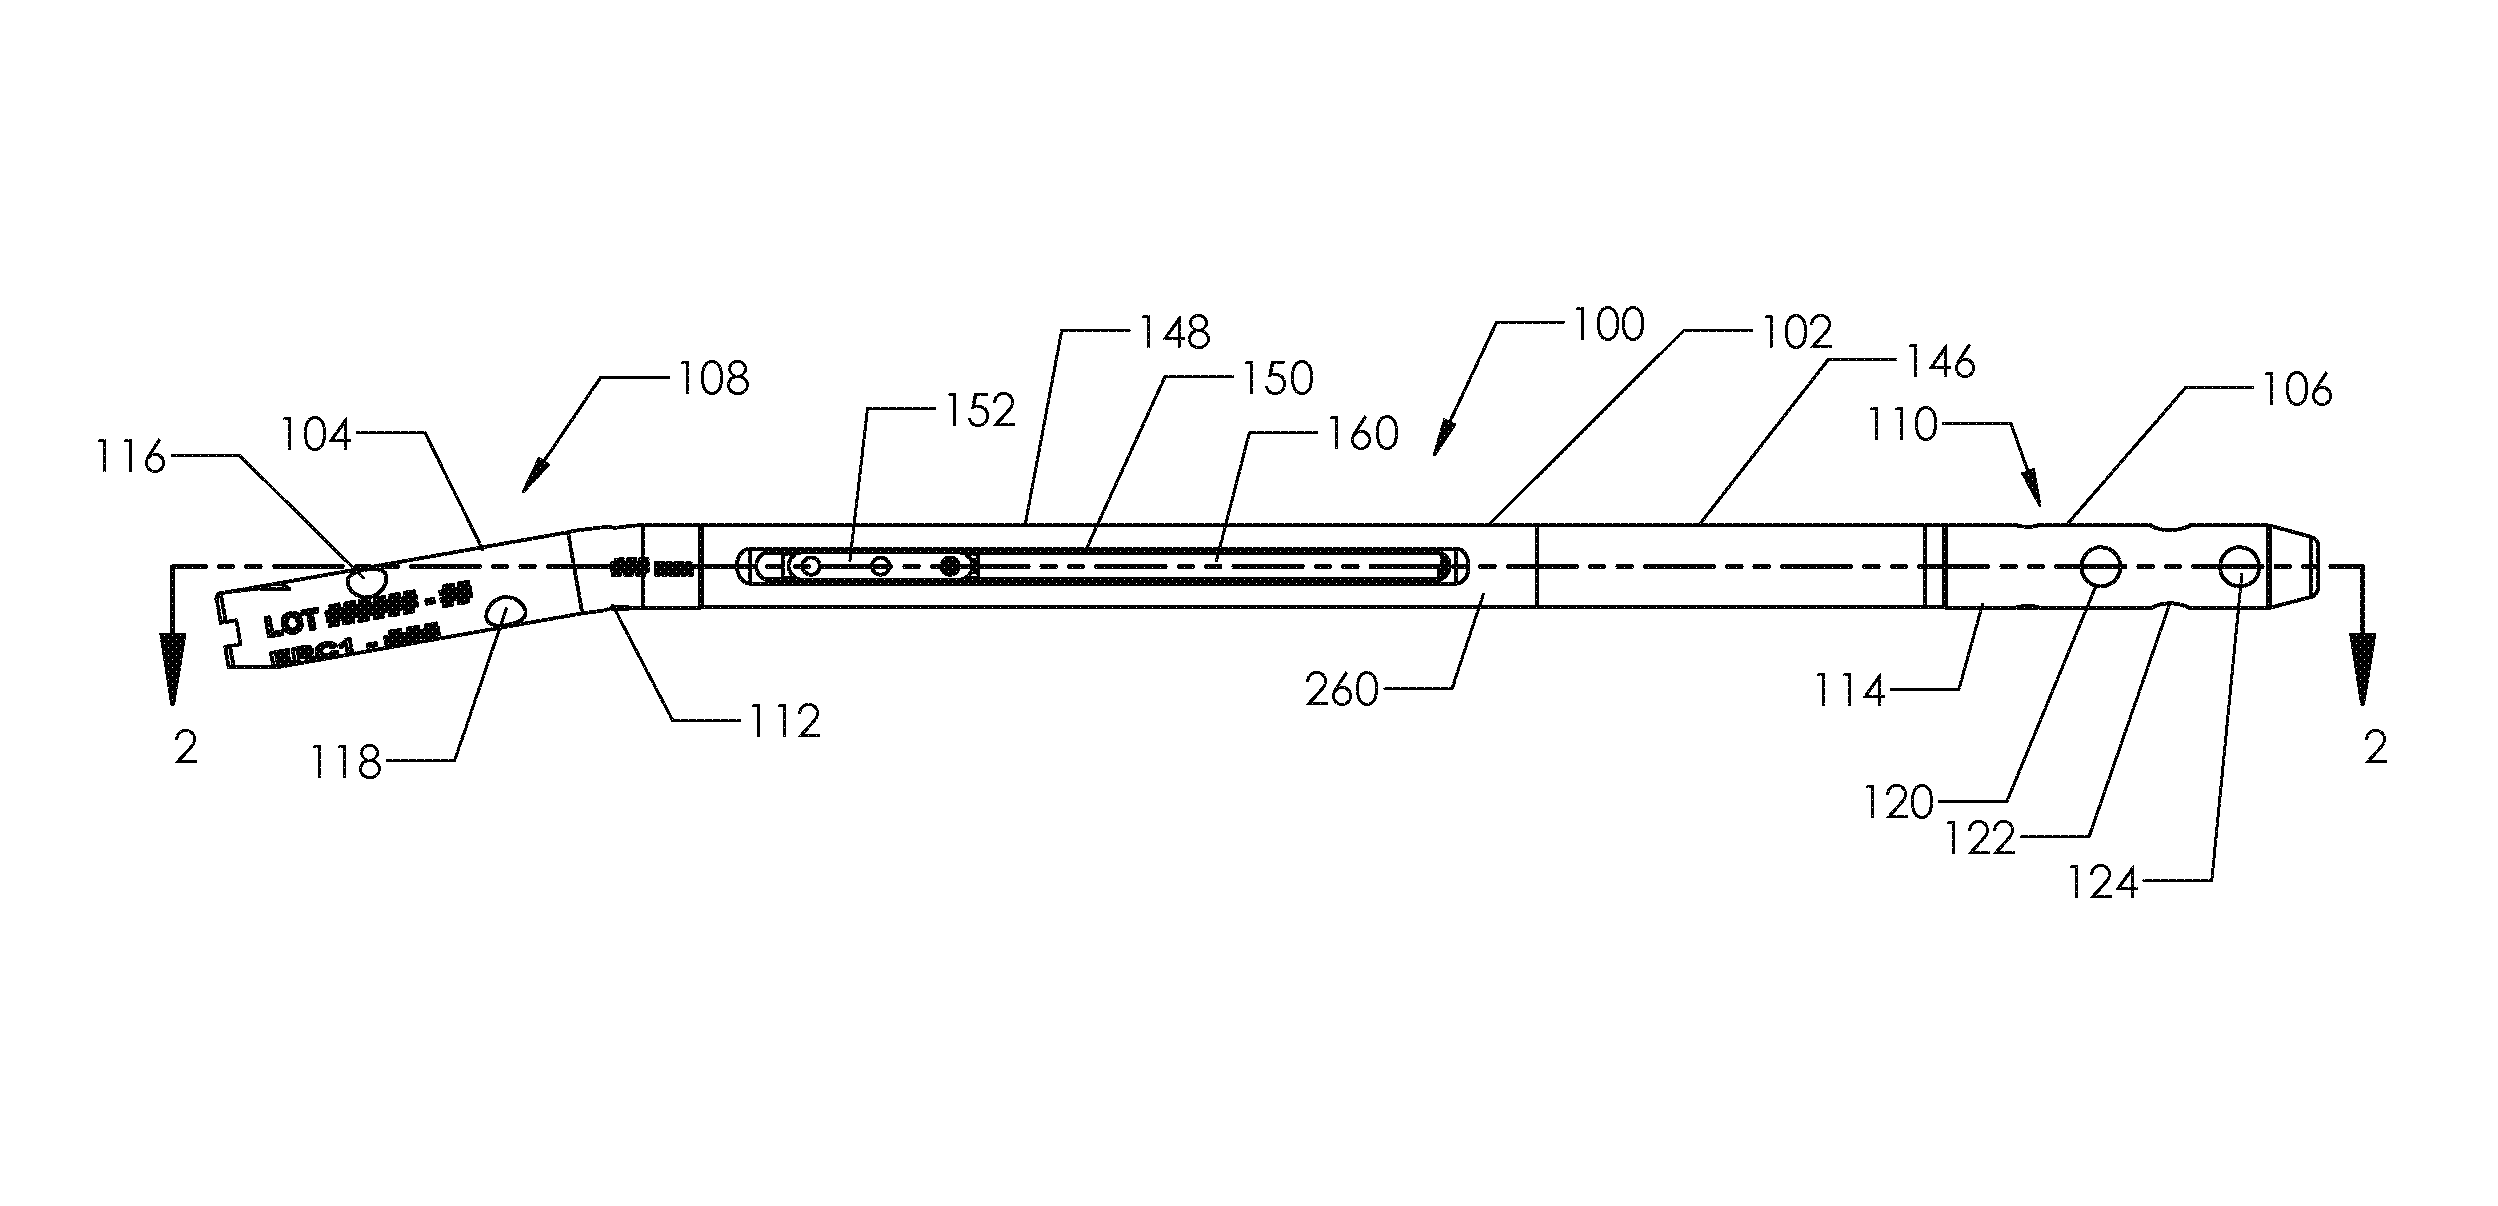 Implantable dynamic apparatus having an anti jamming feature